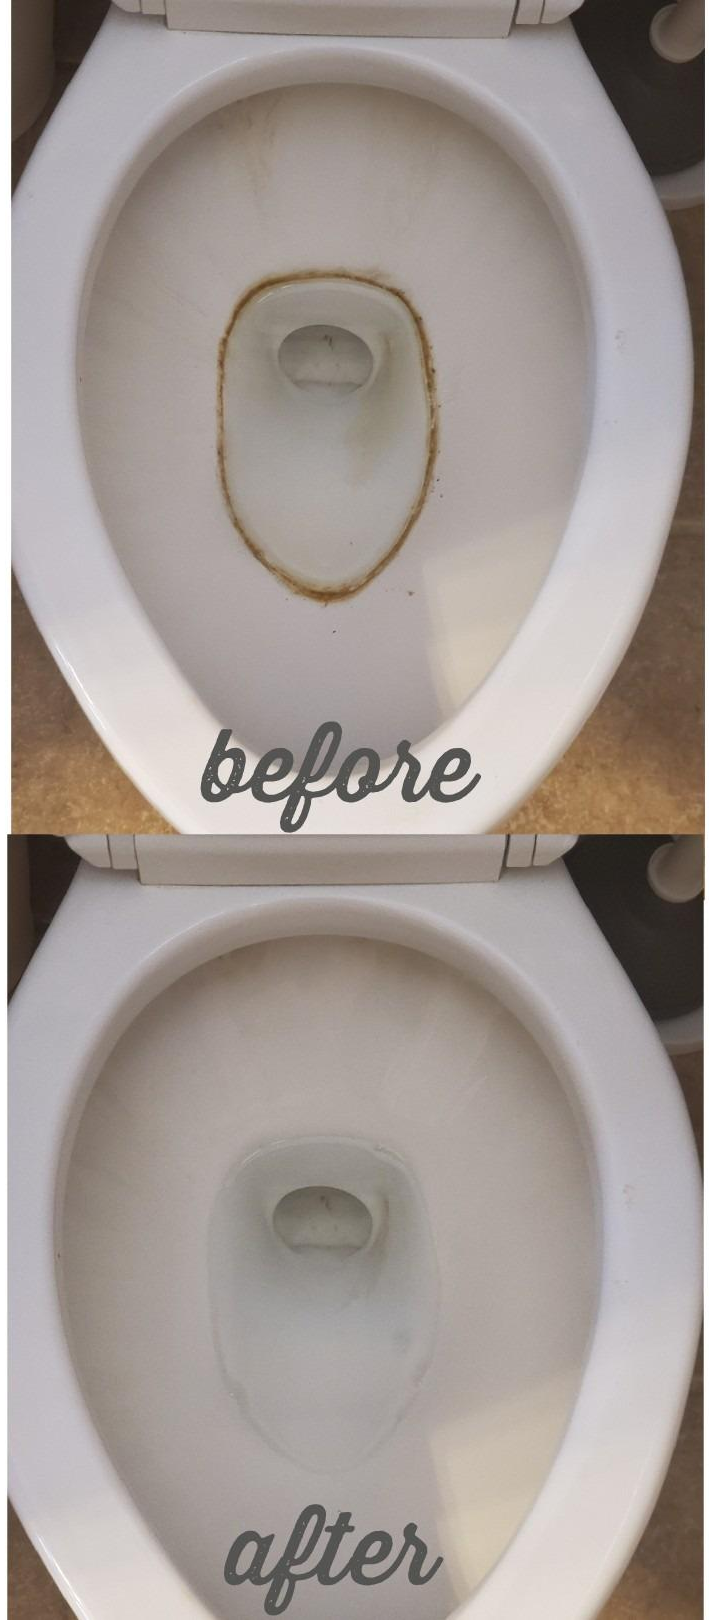 A reviewer's toilet before and after using pumice stone with dark ring mostly gone